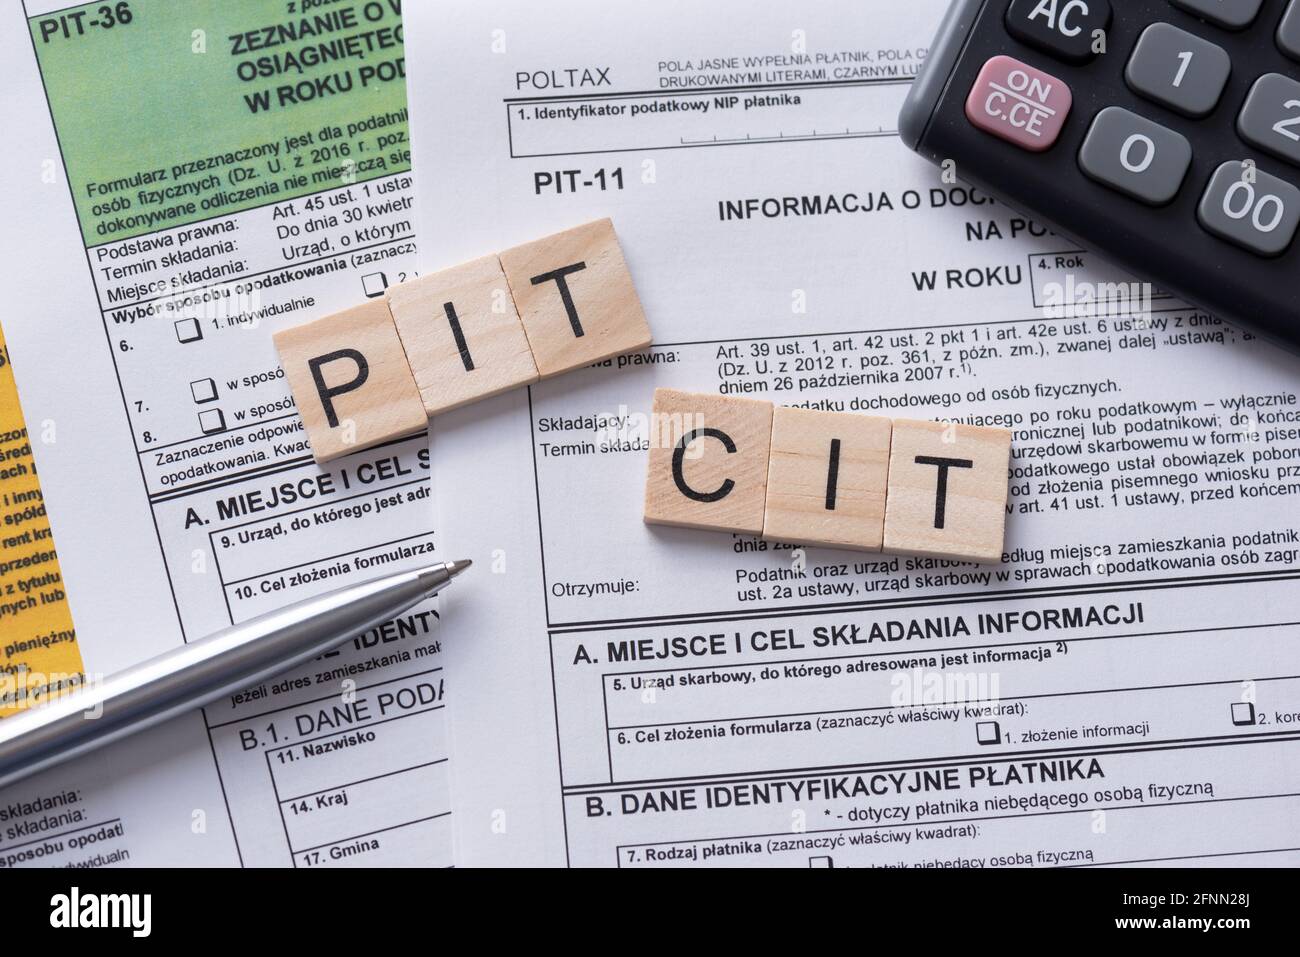 Tax income concept with polish tax forms and PIT, CIT words from tiles, means personal and company tax income in Poland Stock Photo